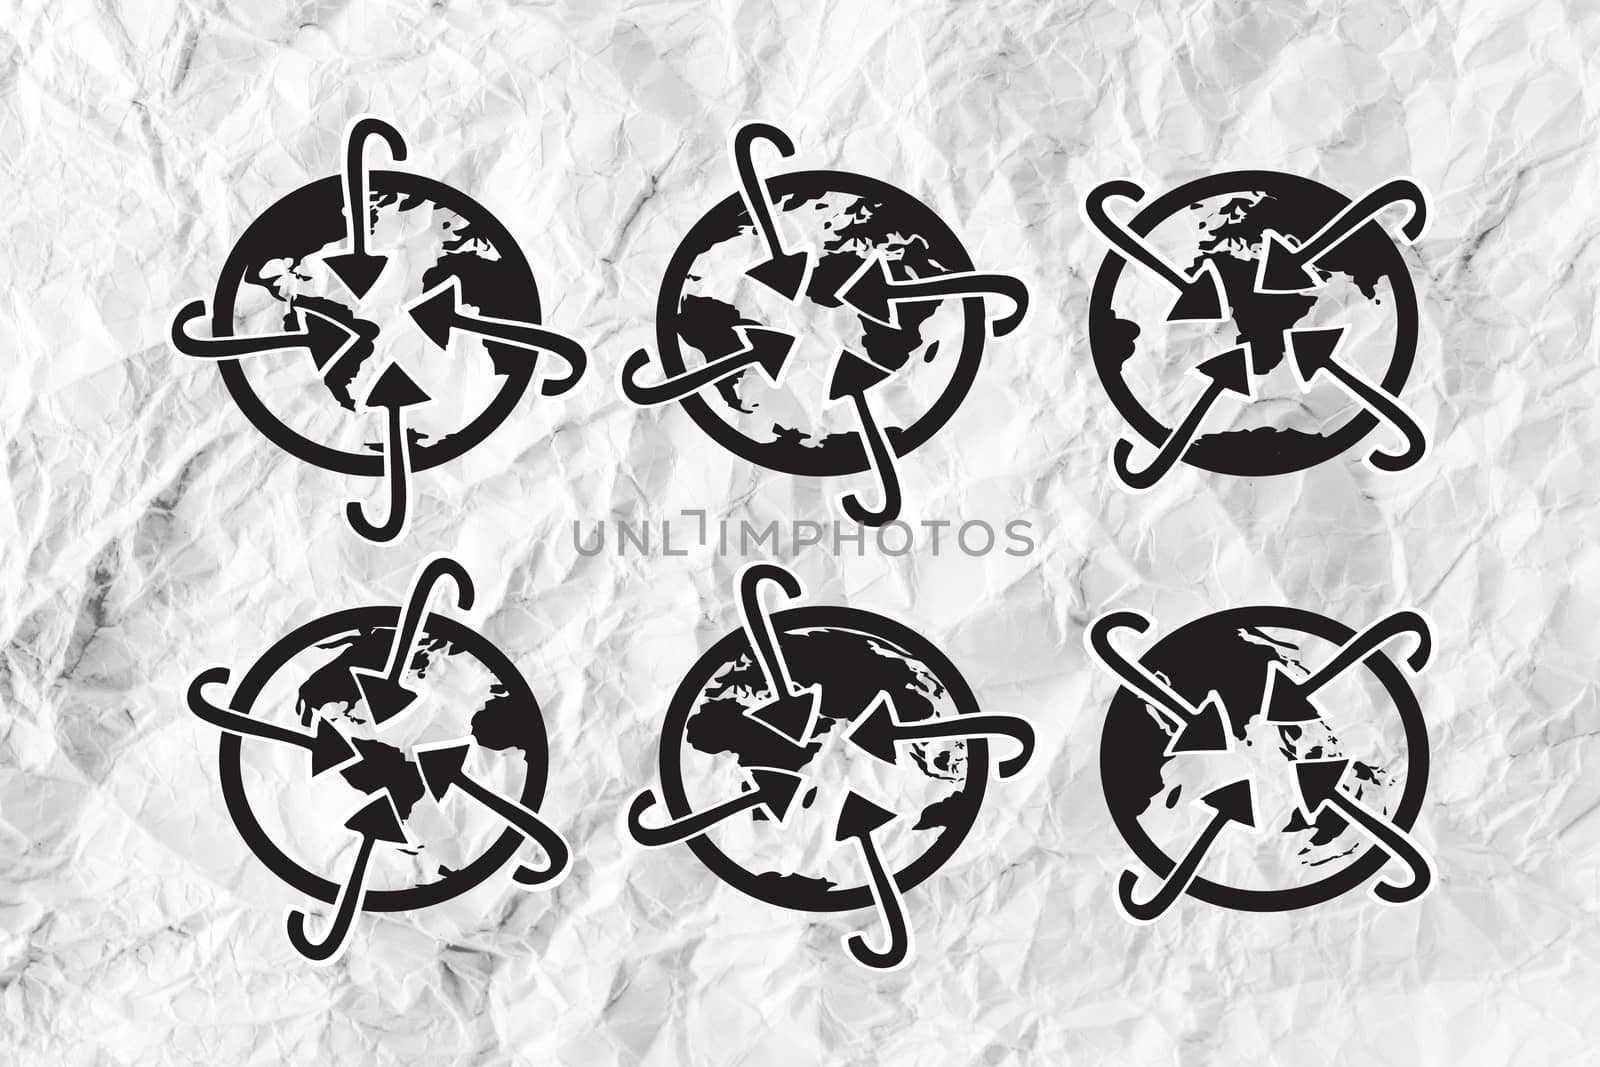 Globe earth icons themes idea design on crumpled paper by kiddaikiddee